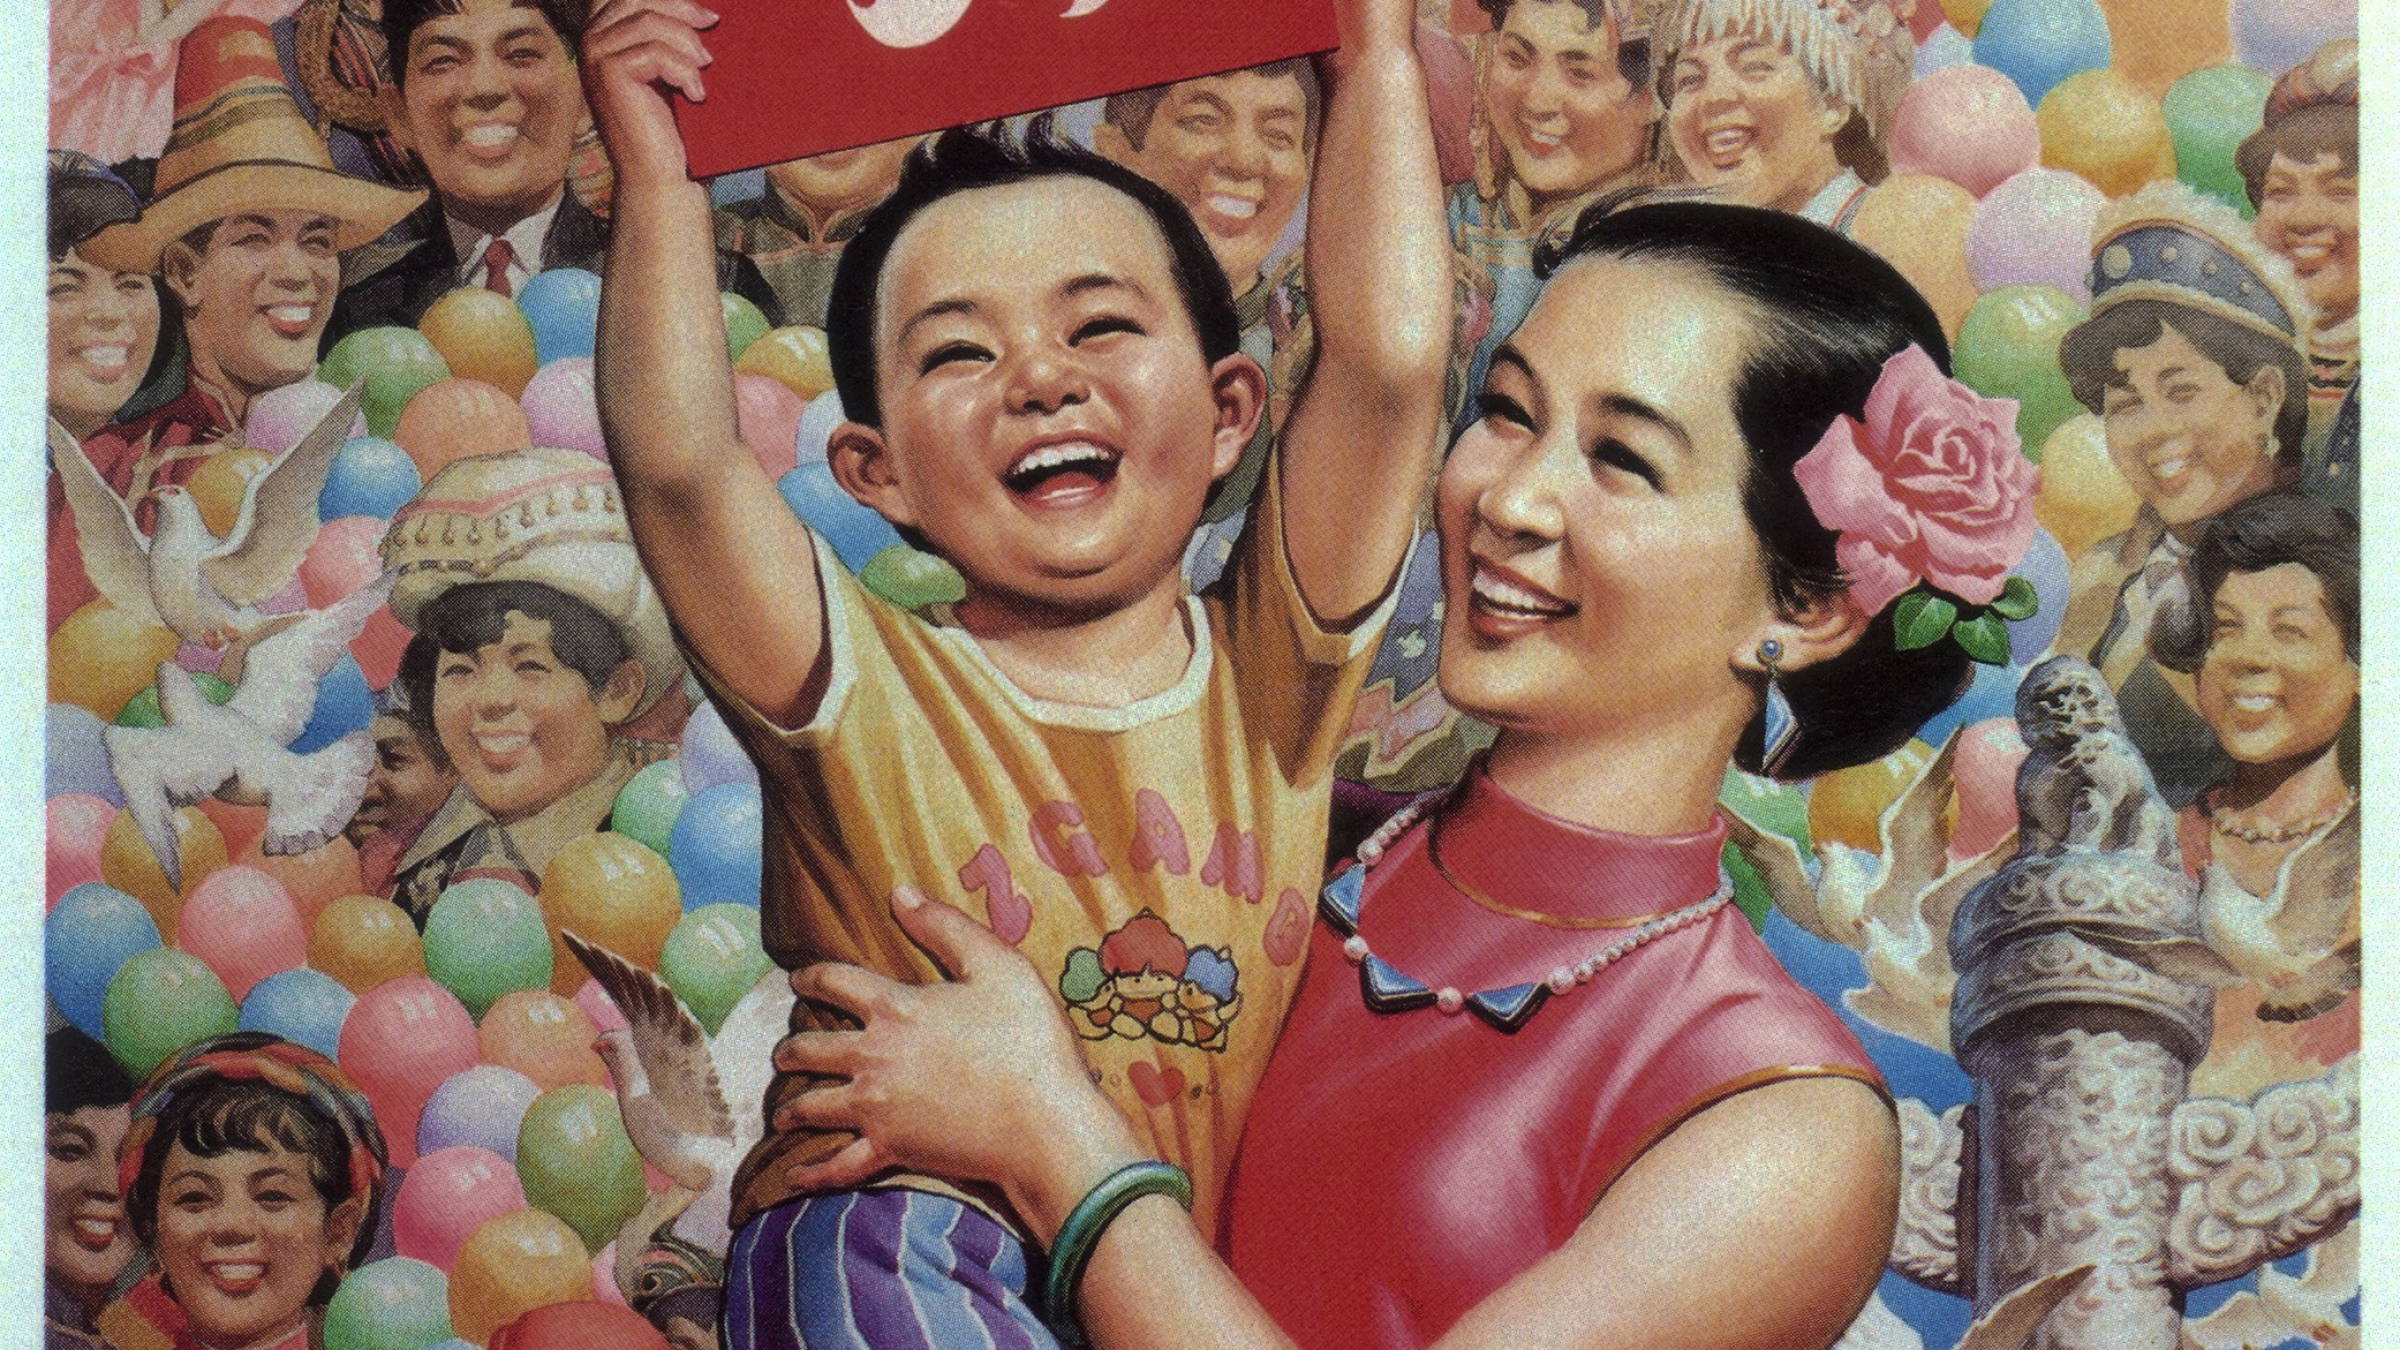 A Chinese propaganda poster from 1997 entitled "Enthusiastically Celebrate the Return of Hong Kong."